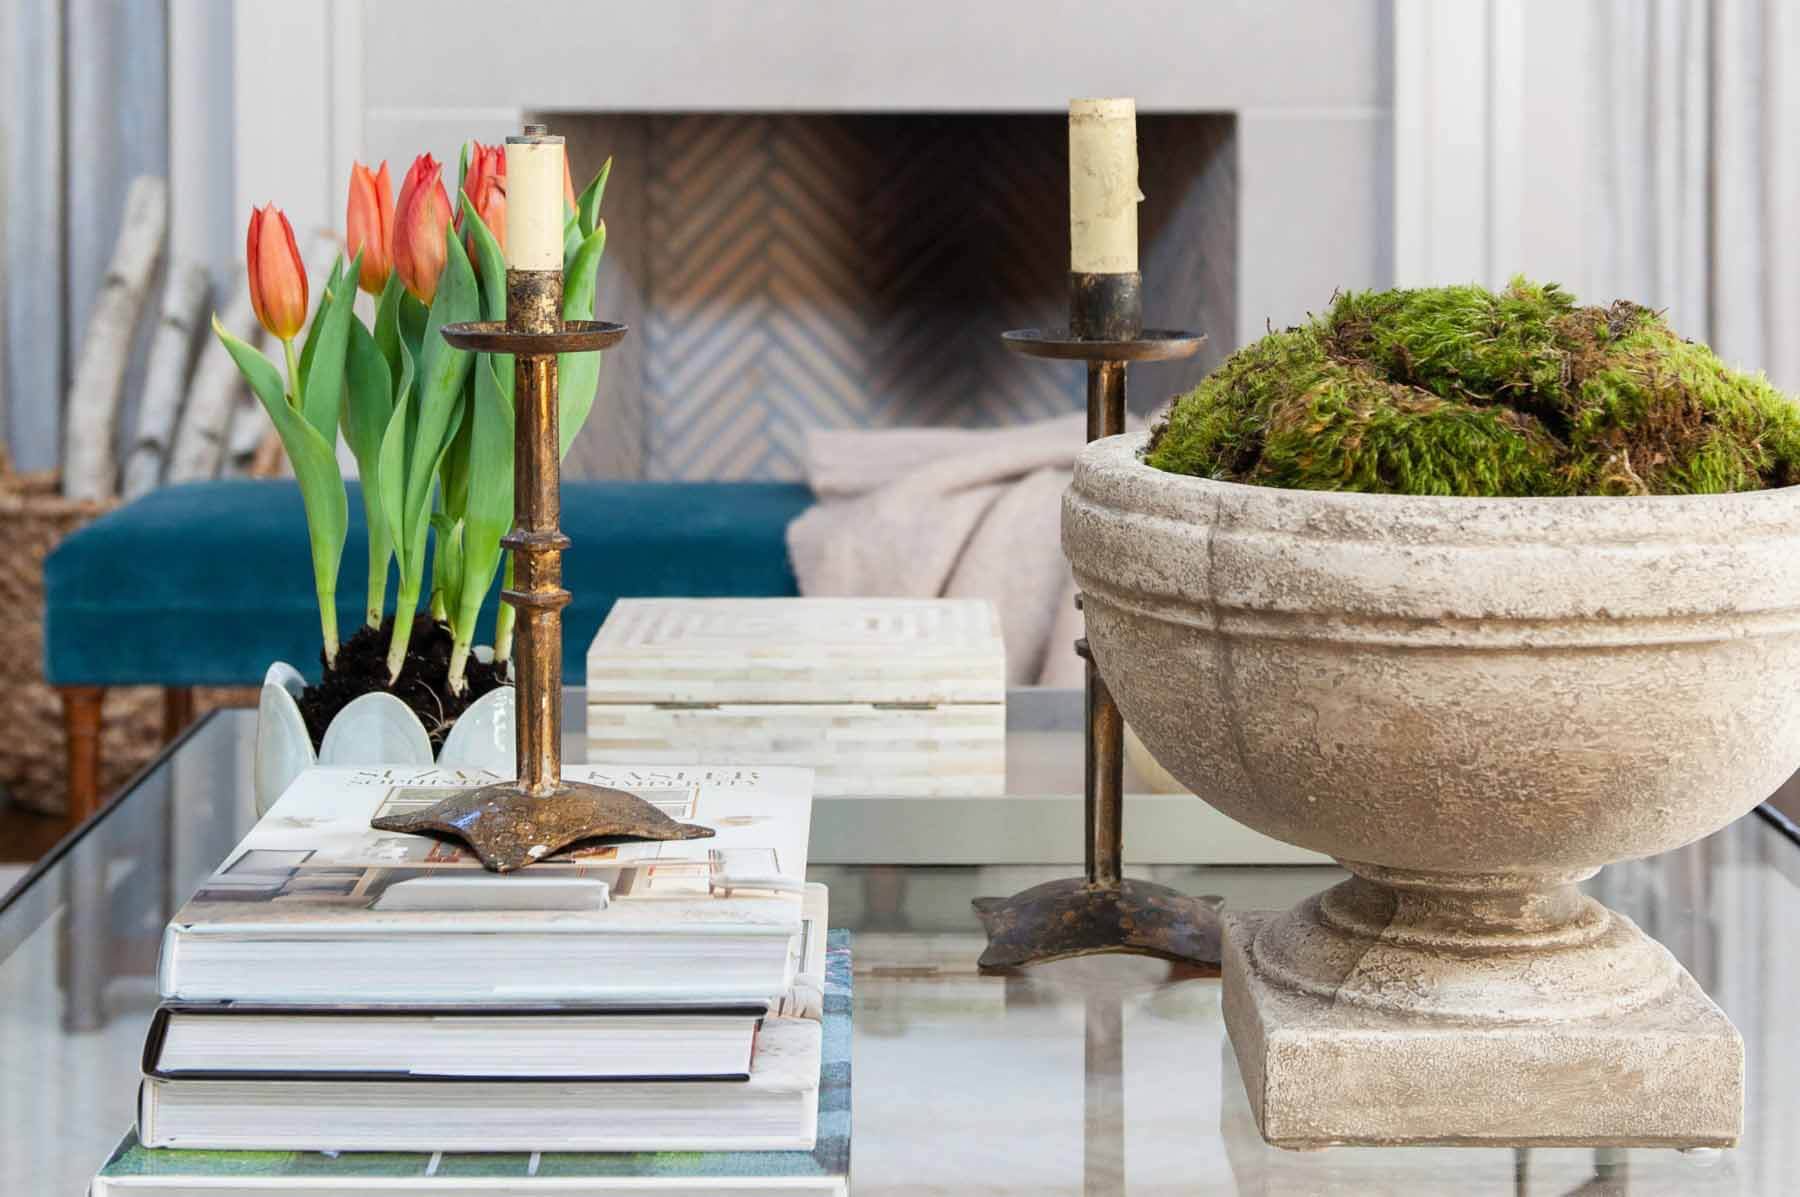 Debbie Matthews design vignette with antique candlesticks, books, tulips and greenery